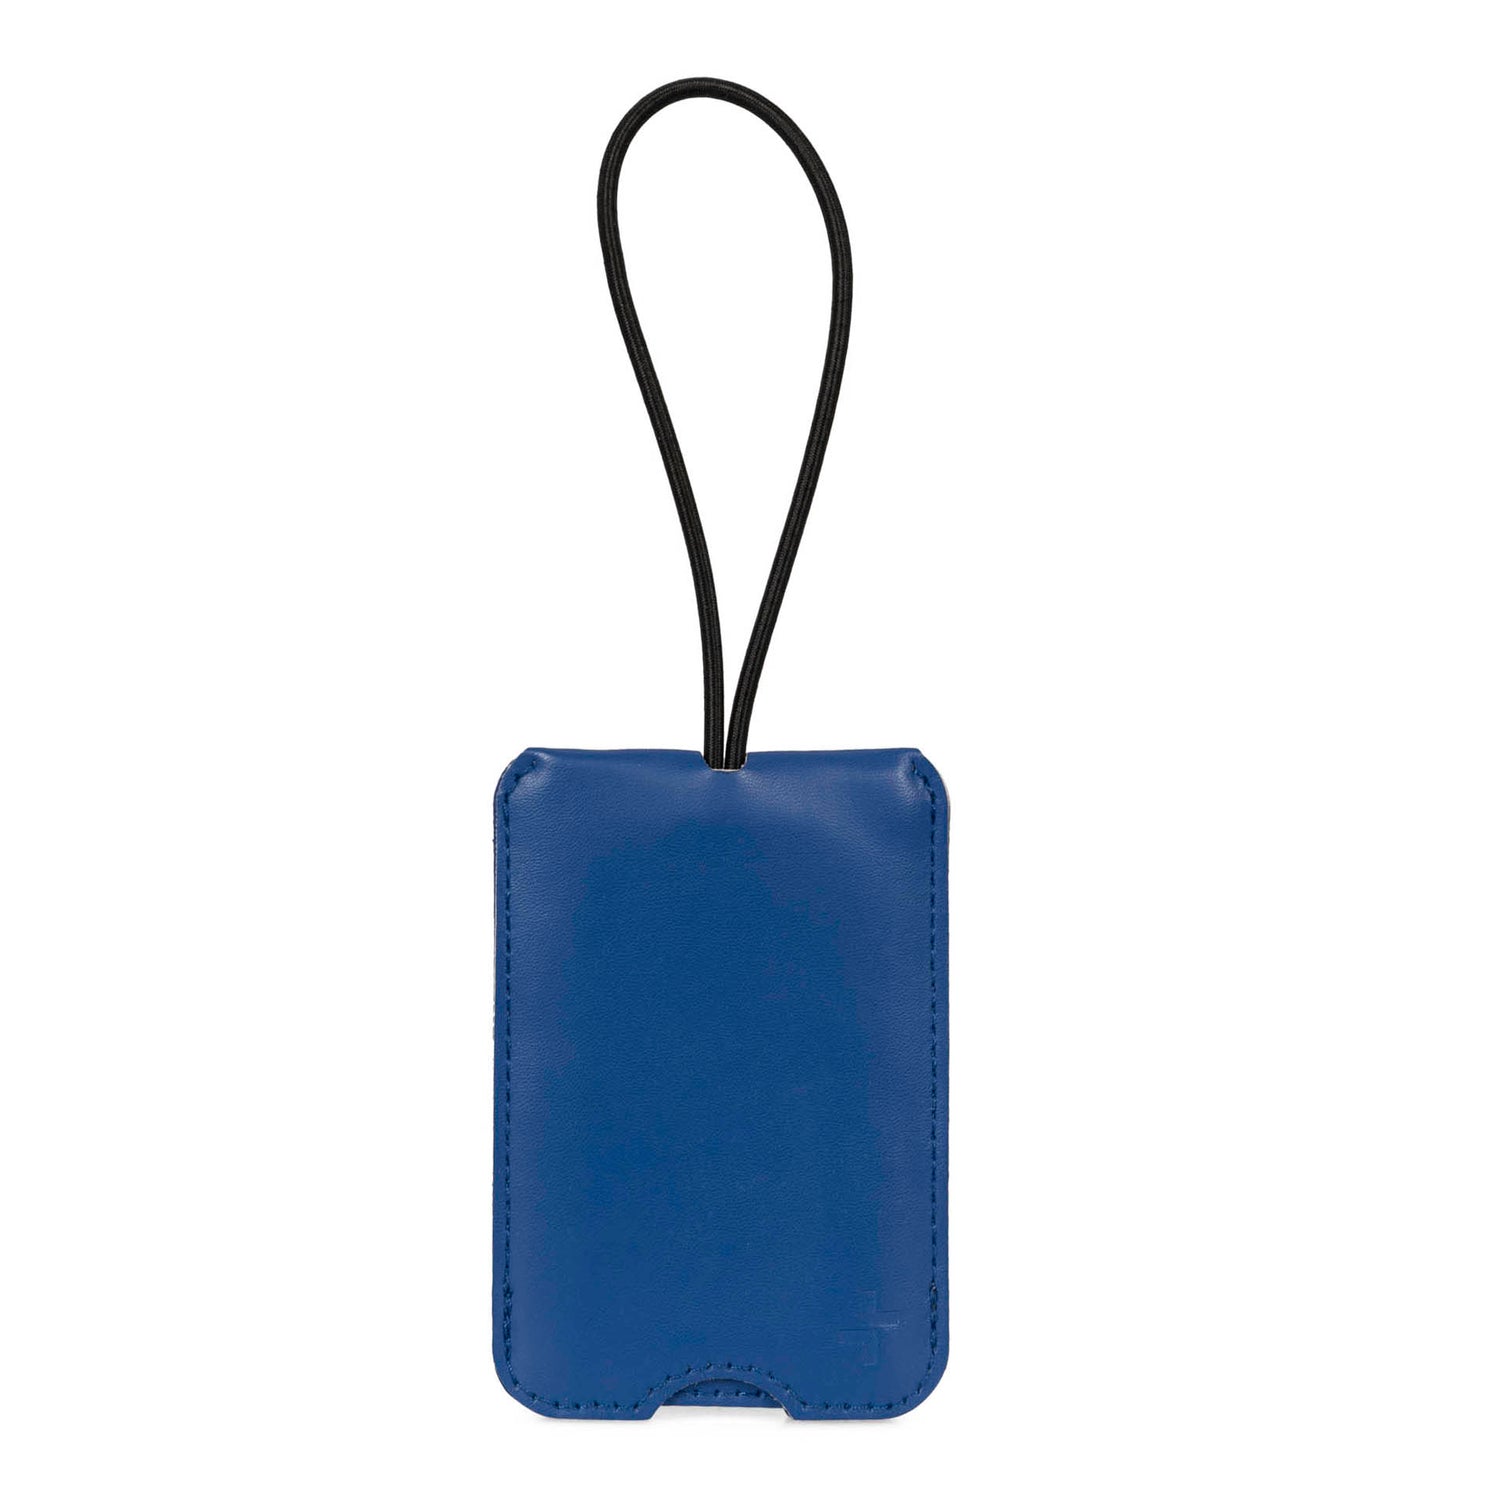 Front side of a blue luggage tag designed by Tracker showing its cord and PU cover texture.